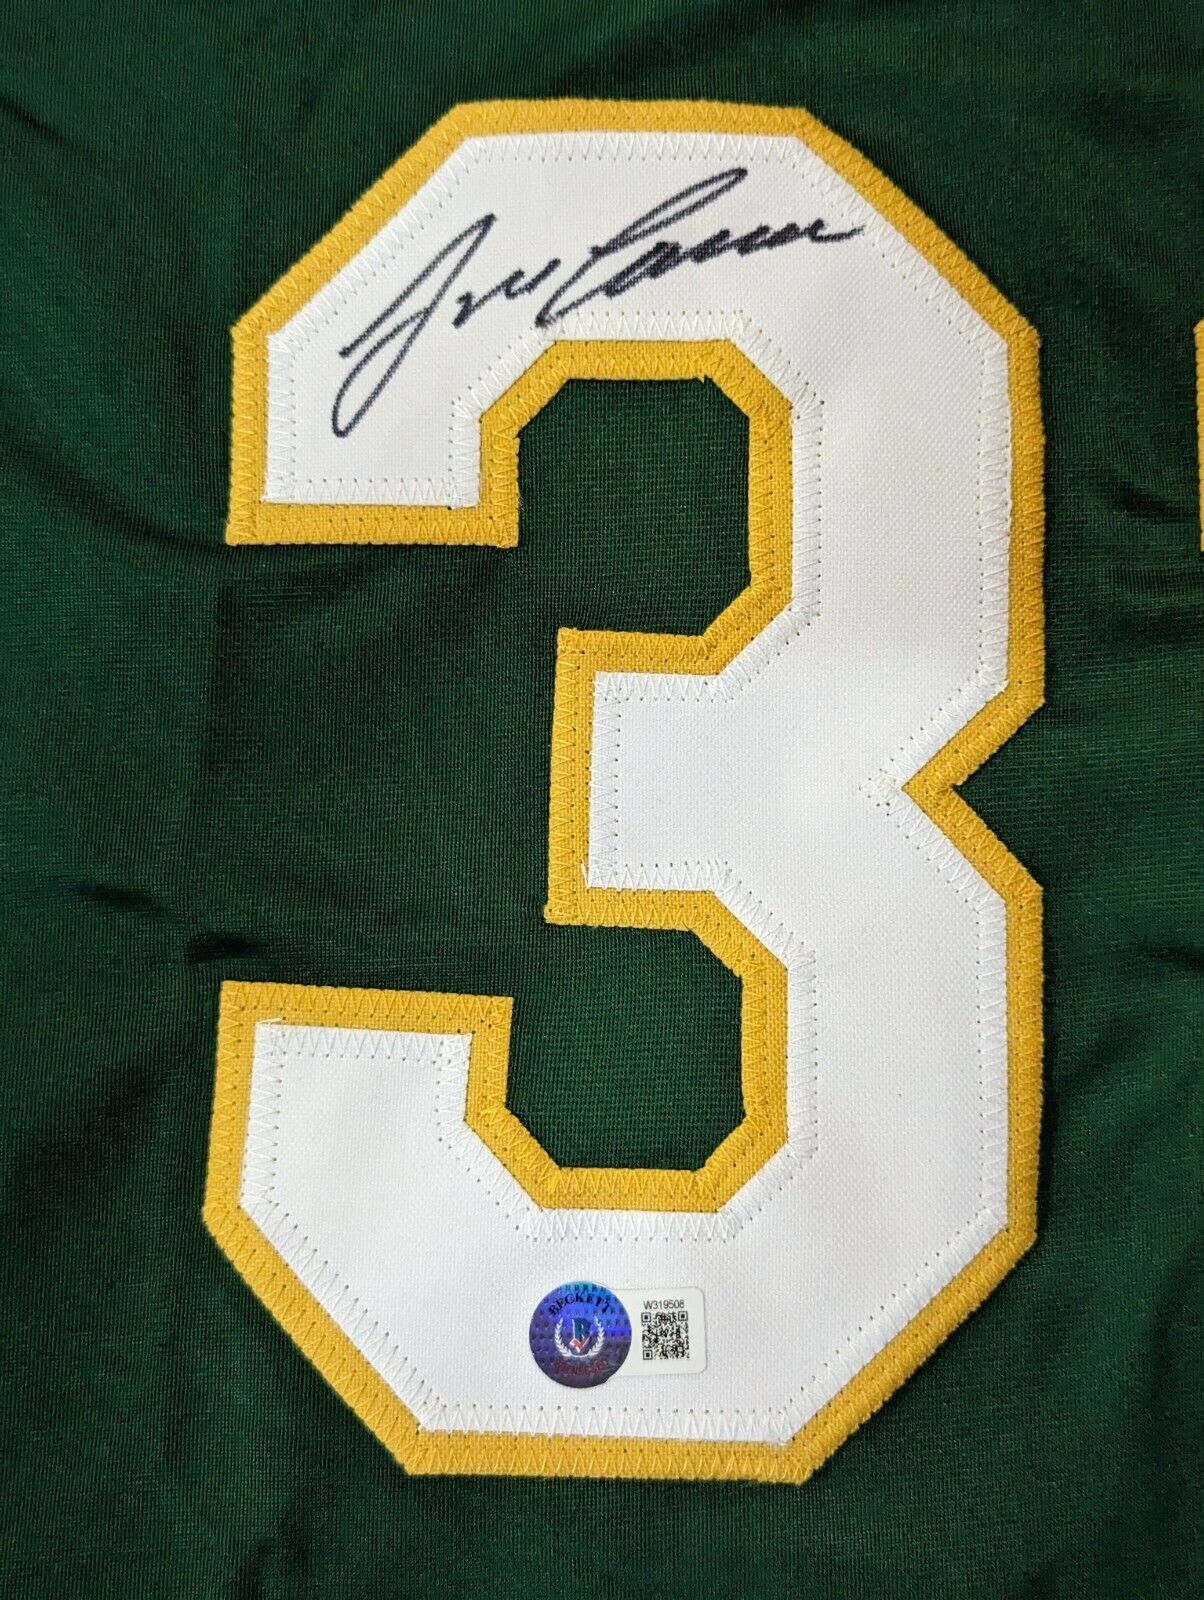 Jose Canseco Signed Jersey (Beckett)